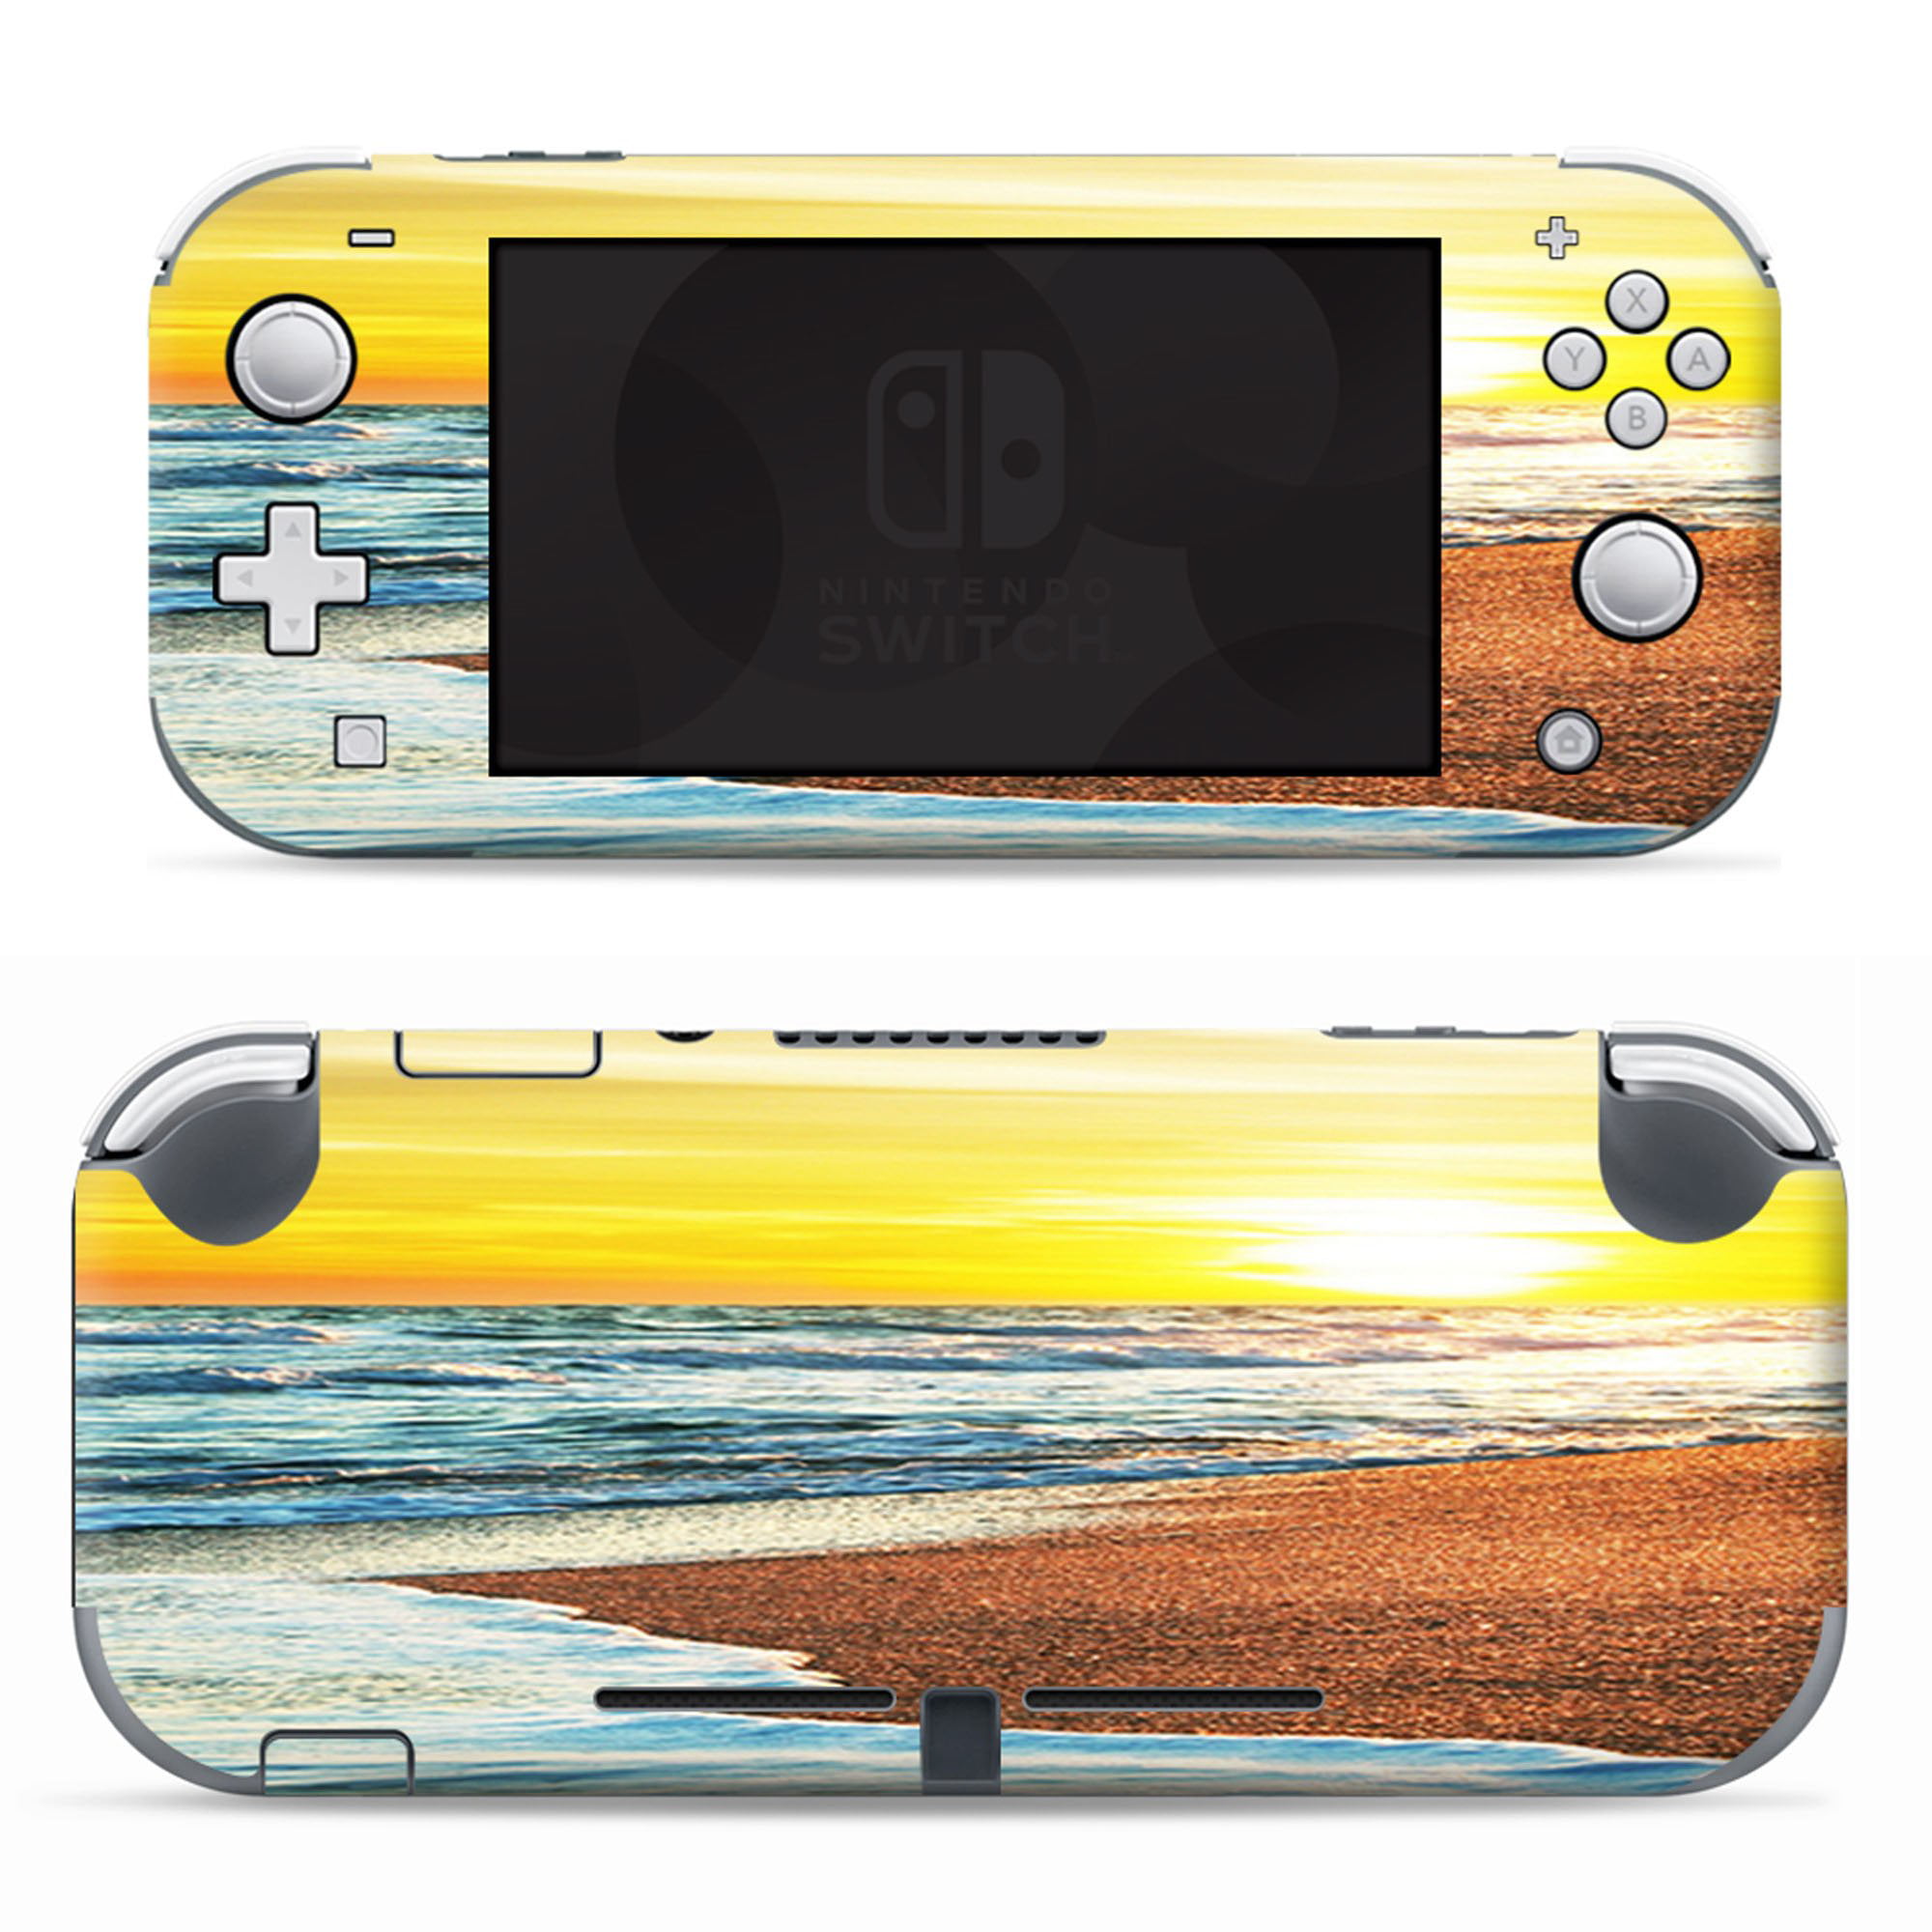 Nintendo Switch Lite Skins Decals Vinyl Wrap decal stickers skins cover Ocean Sunset